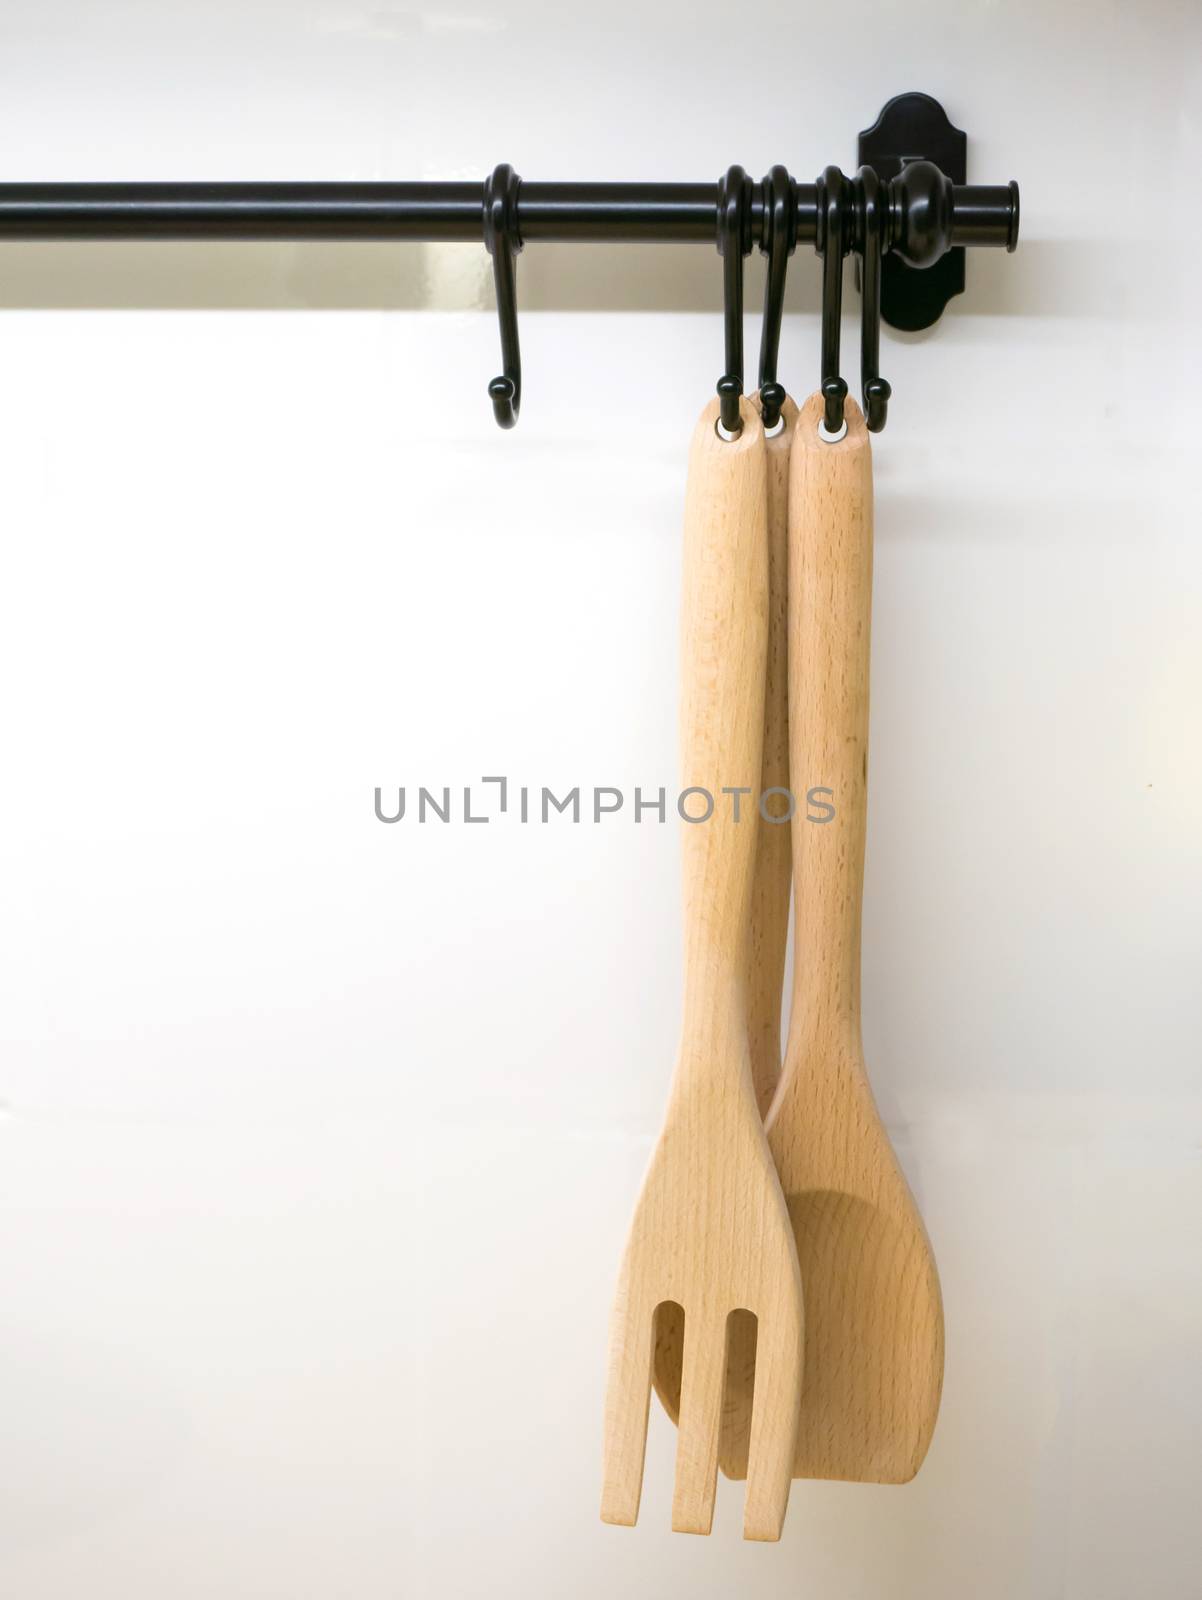 Wood turner in the kitchen on white wall background